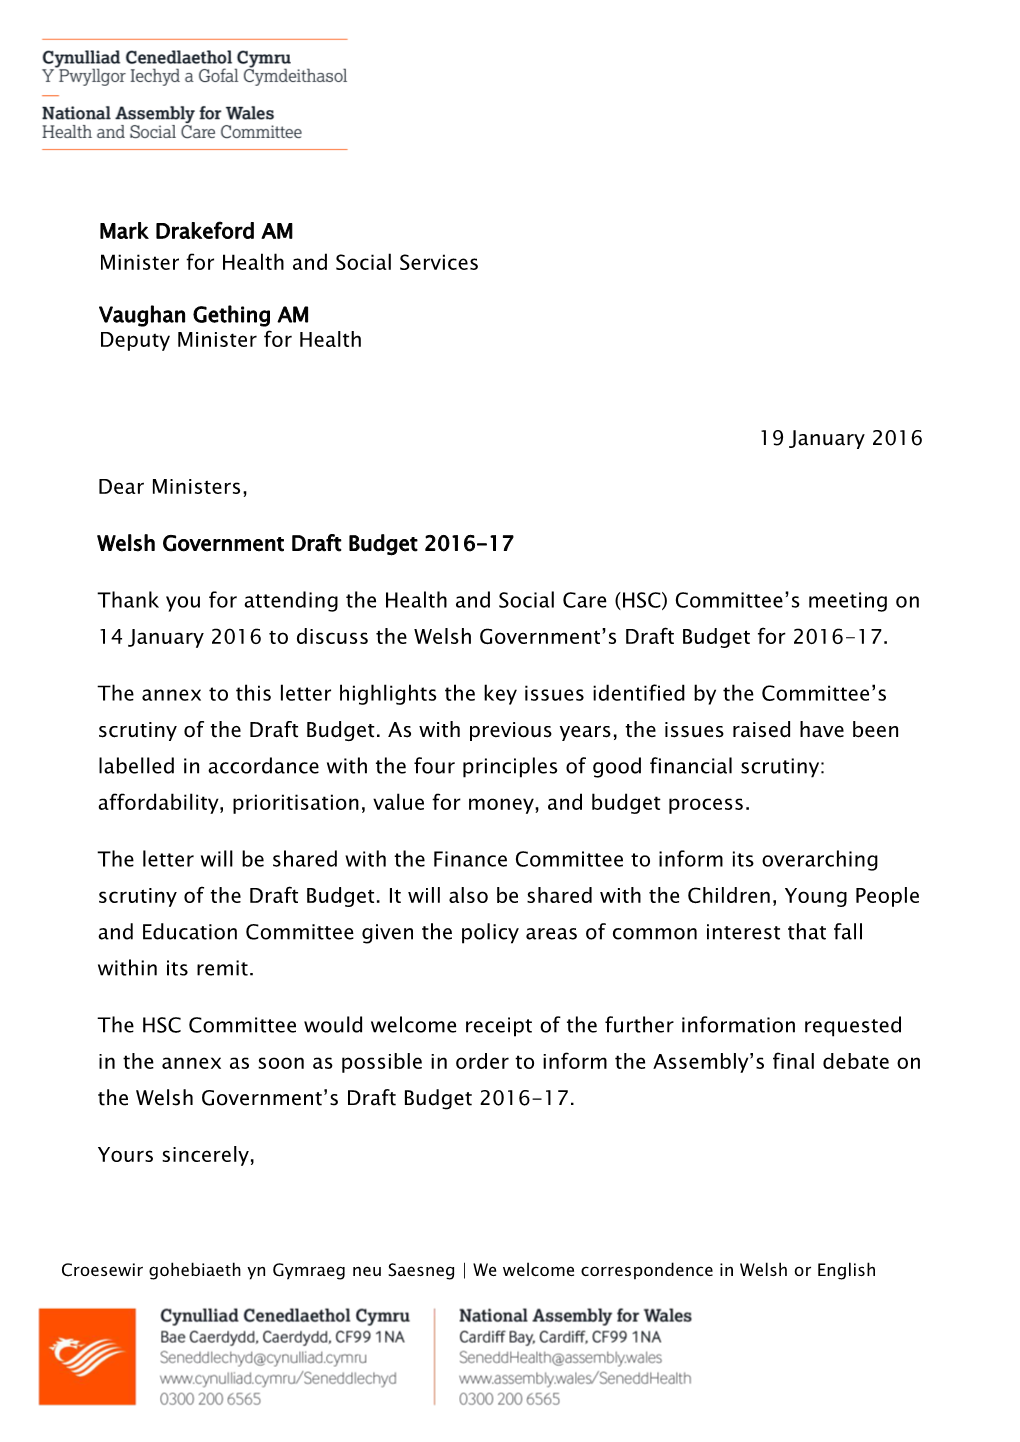 Letter from Chair of Health and Social Care Committee to the Minister for Health and Social